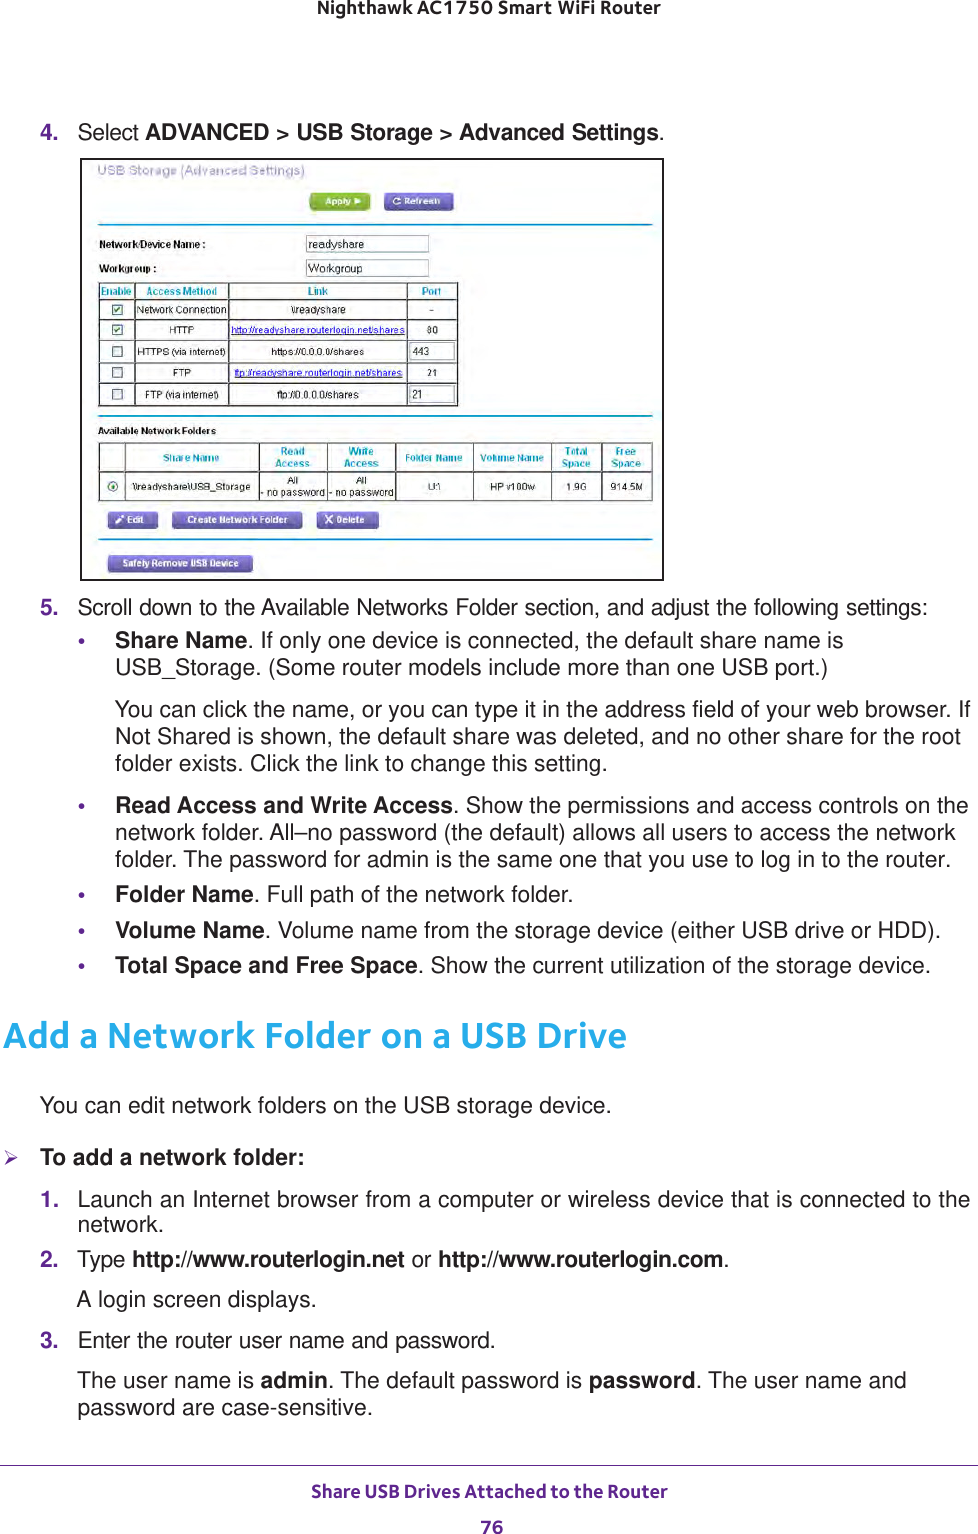 Share USB Drives Attached to the Router 76Nighthawk AC1750 Smart WiFi Router 4.  Select ADVANCED &gt; USB Storage &gt; Advanced Settings.5.  Scroll down to the Available Networks Folder section, and adjust the following settings:•Share Name. If only one device is connected, the default share name is USB_Storage. (Some router models include more than one USB port.)You can click the name, or you can type it in the address field of your web browser. If Not Shared is shown, the default share was deleted, and no other share for the root folder exists. Click the link to change this setting.•Read Access and Write Access. Show the permissions and access controls on the network folder. All–no password (the default) allows all users to access the network folder. The password for admin is the same one that you use to log in to the router.•Folder Name. Full path of the network folder. •Volume Name. Volume name from the storage device (either USB drive or HDD).•Total Space and Free Space. Show the current utilization of the storage device.Add a Network Folder on a USB DriveYou can edit network folders on the USB storage device.To add a network folder:1.  Launch an Internet browser from a computer or wireless device that is connected to the network.2.  Type http://www.routerlogin.net or http://www.routerlogin.com.A login screen displays.3.  Enter the router user name and password.The user name is admin. The default password is password. The user name and password are case-sensitive.